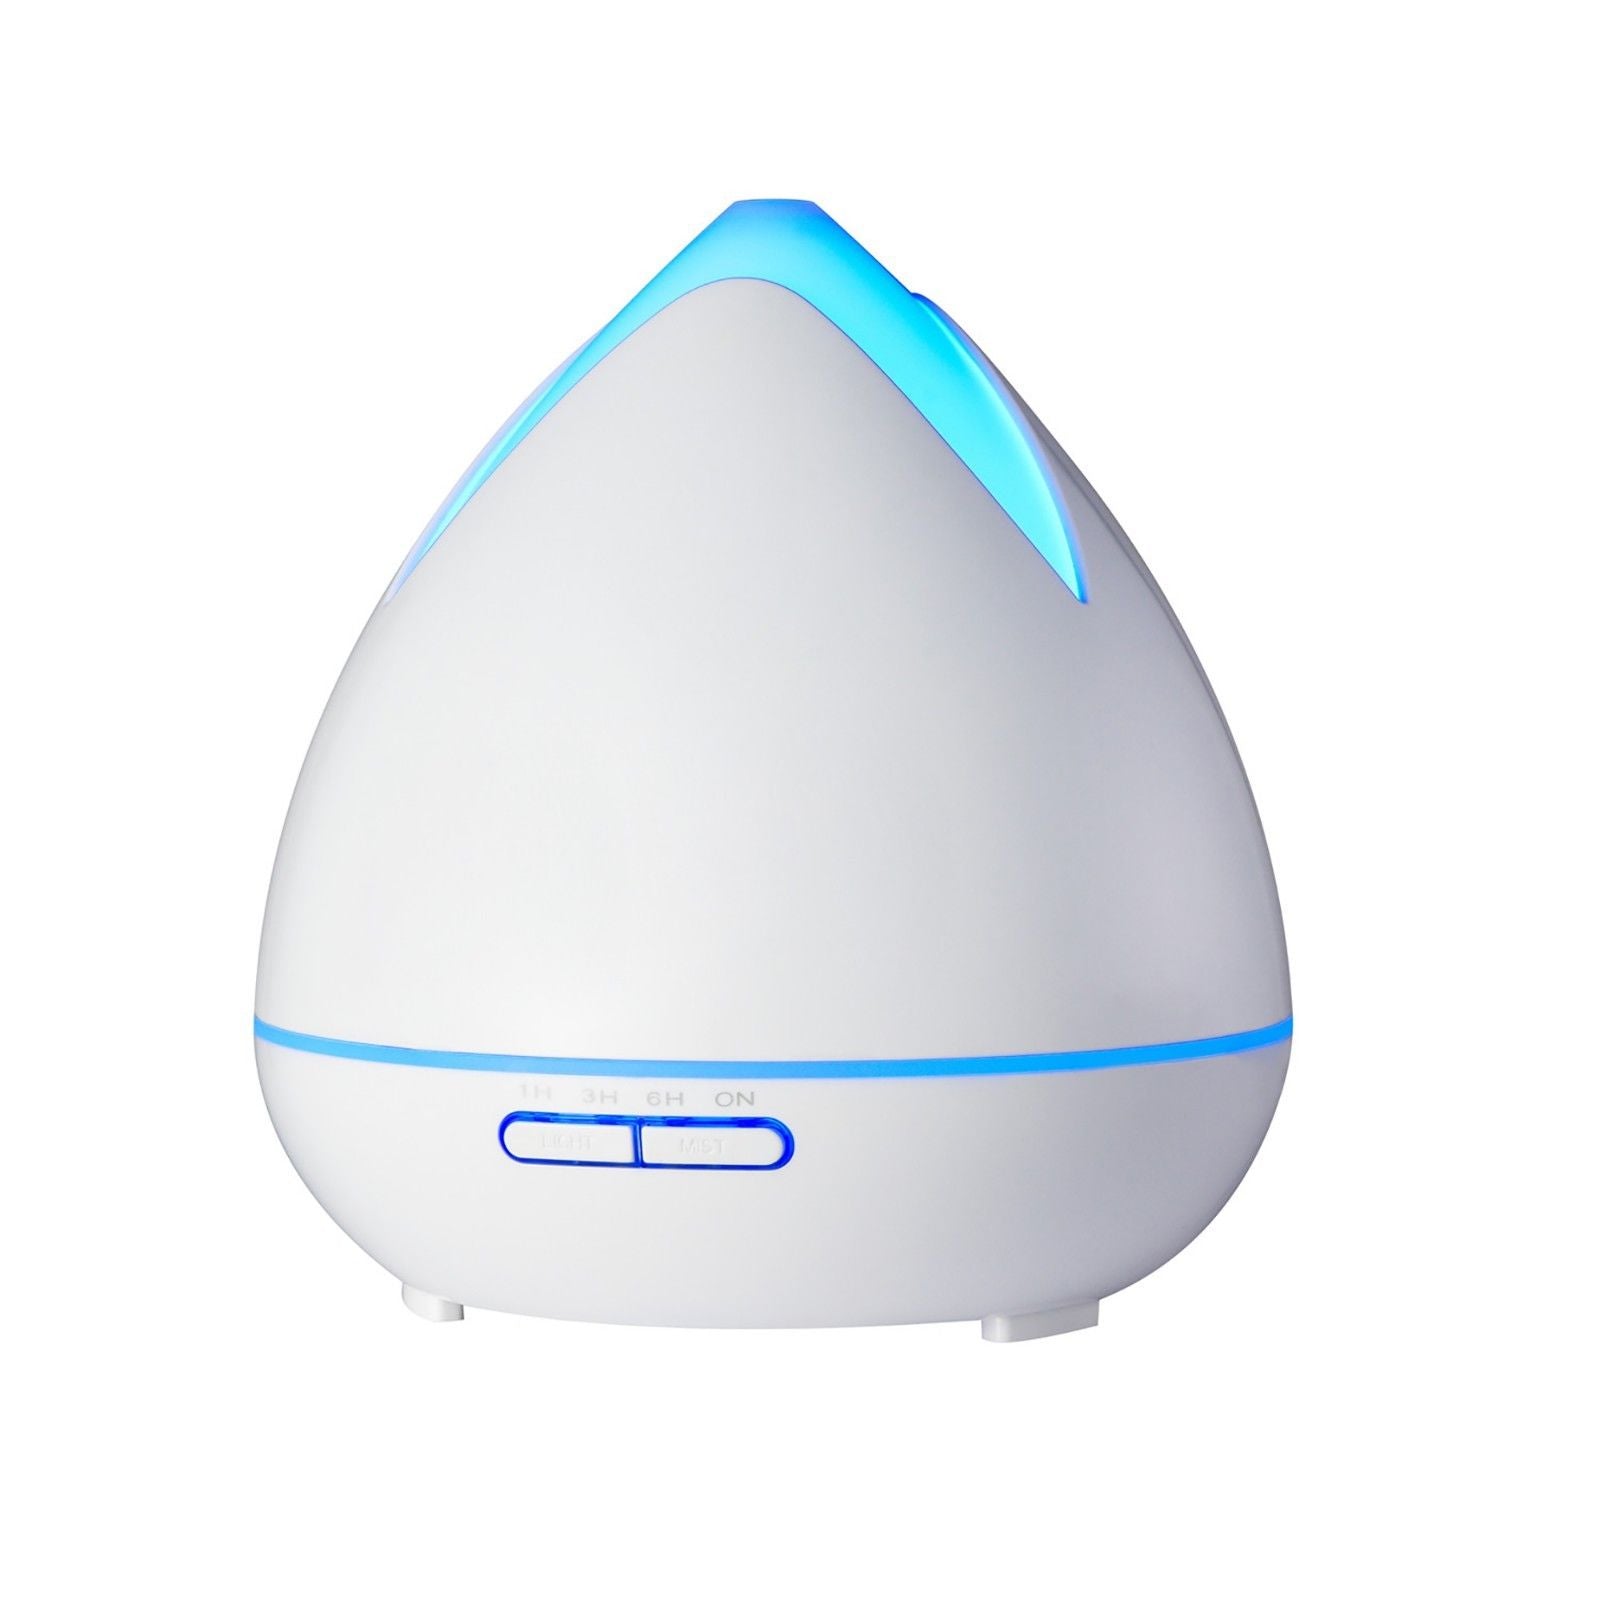 Essential Oils Ultrasonic Aromatherapy Diffuser Air Humidifier Purify 400ML White - AULASH